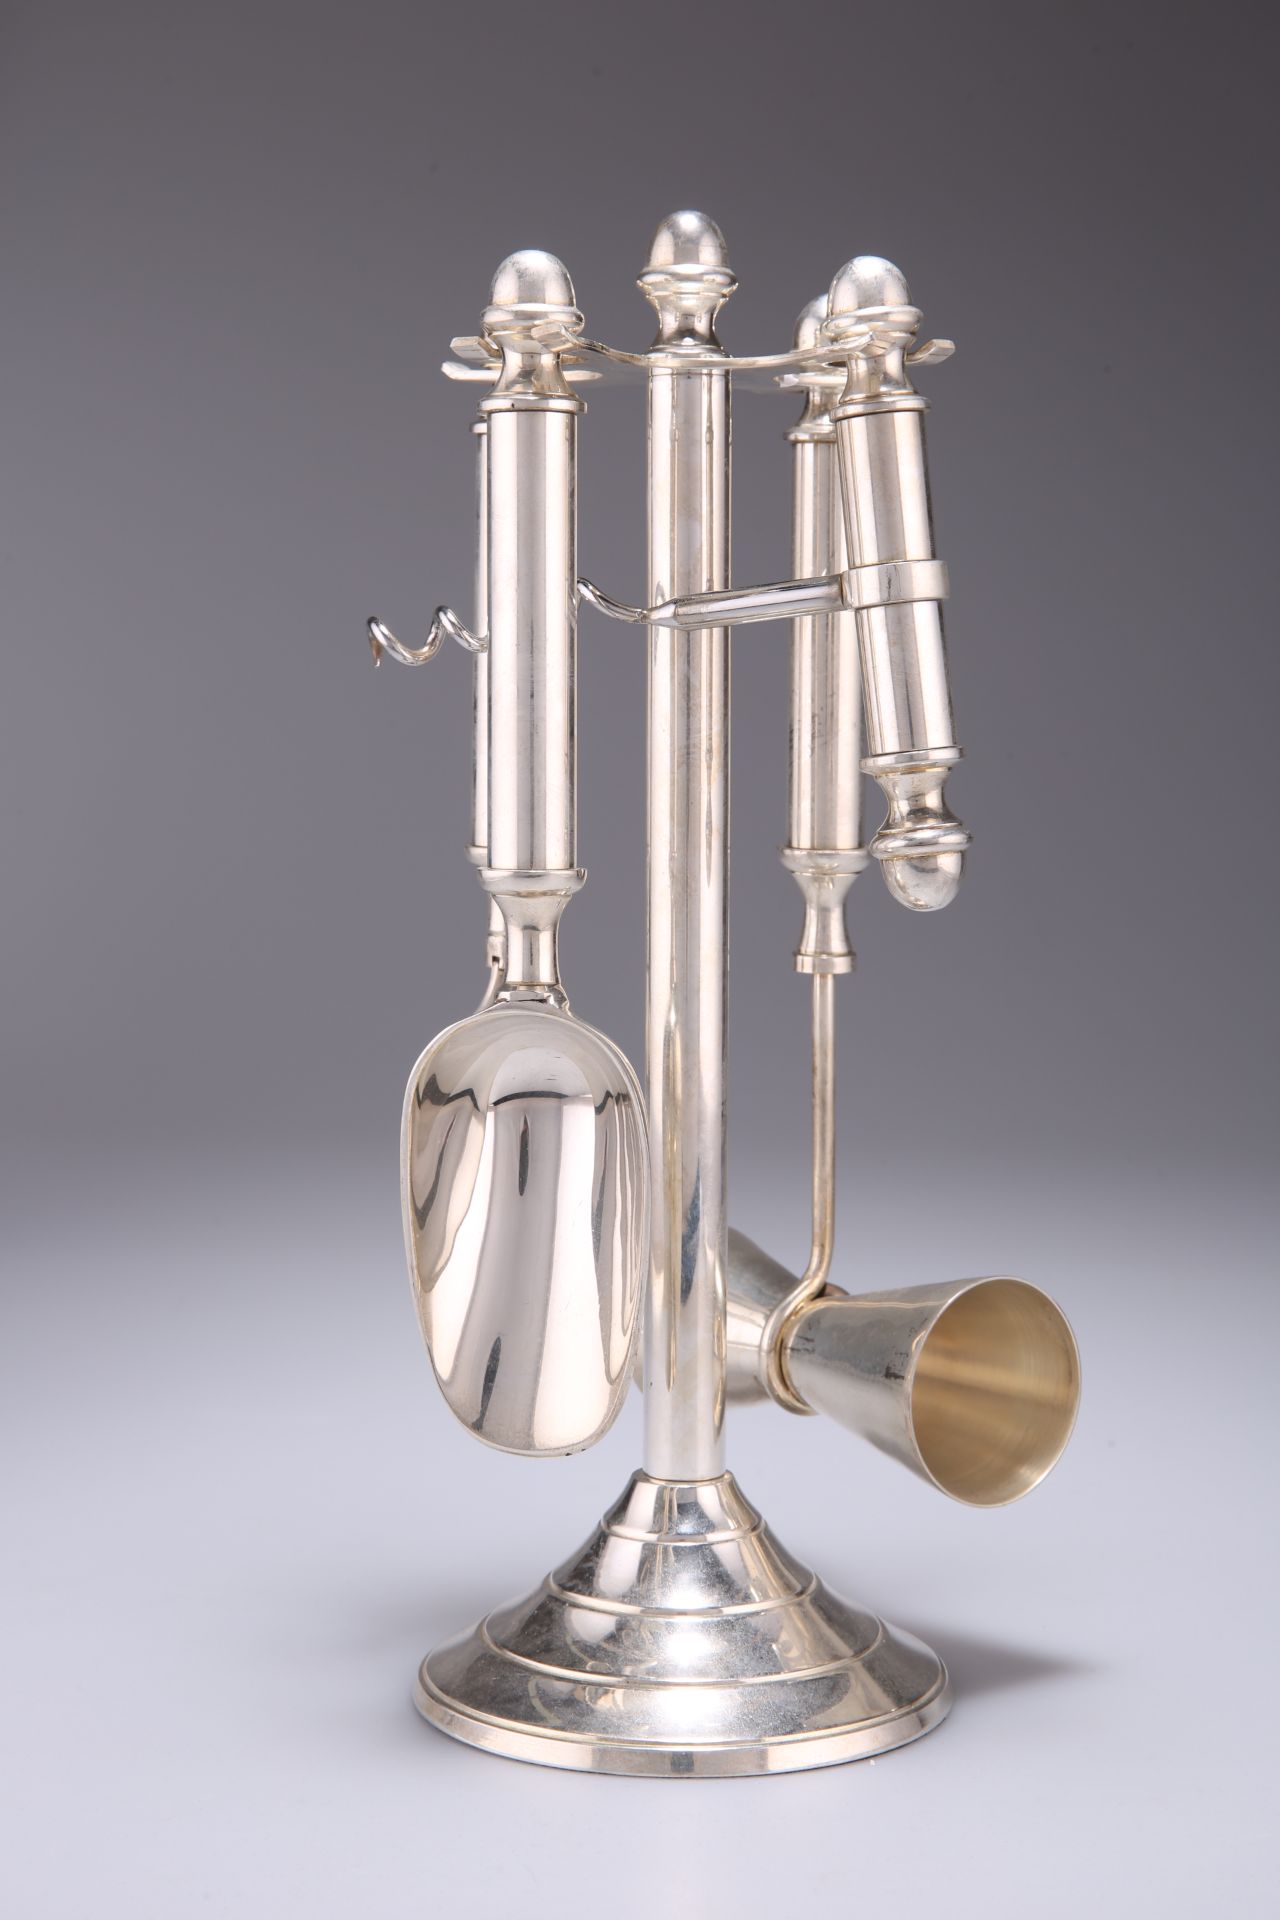 AN ART DECO STYLE SILVER-PLATED DRINKS COMPANION - Image 2 of 2